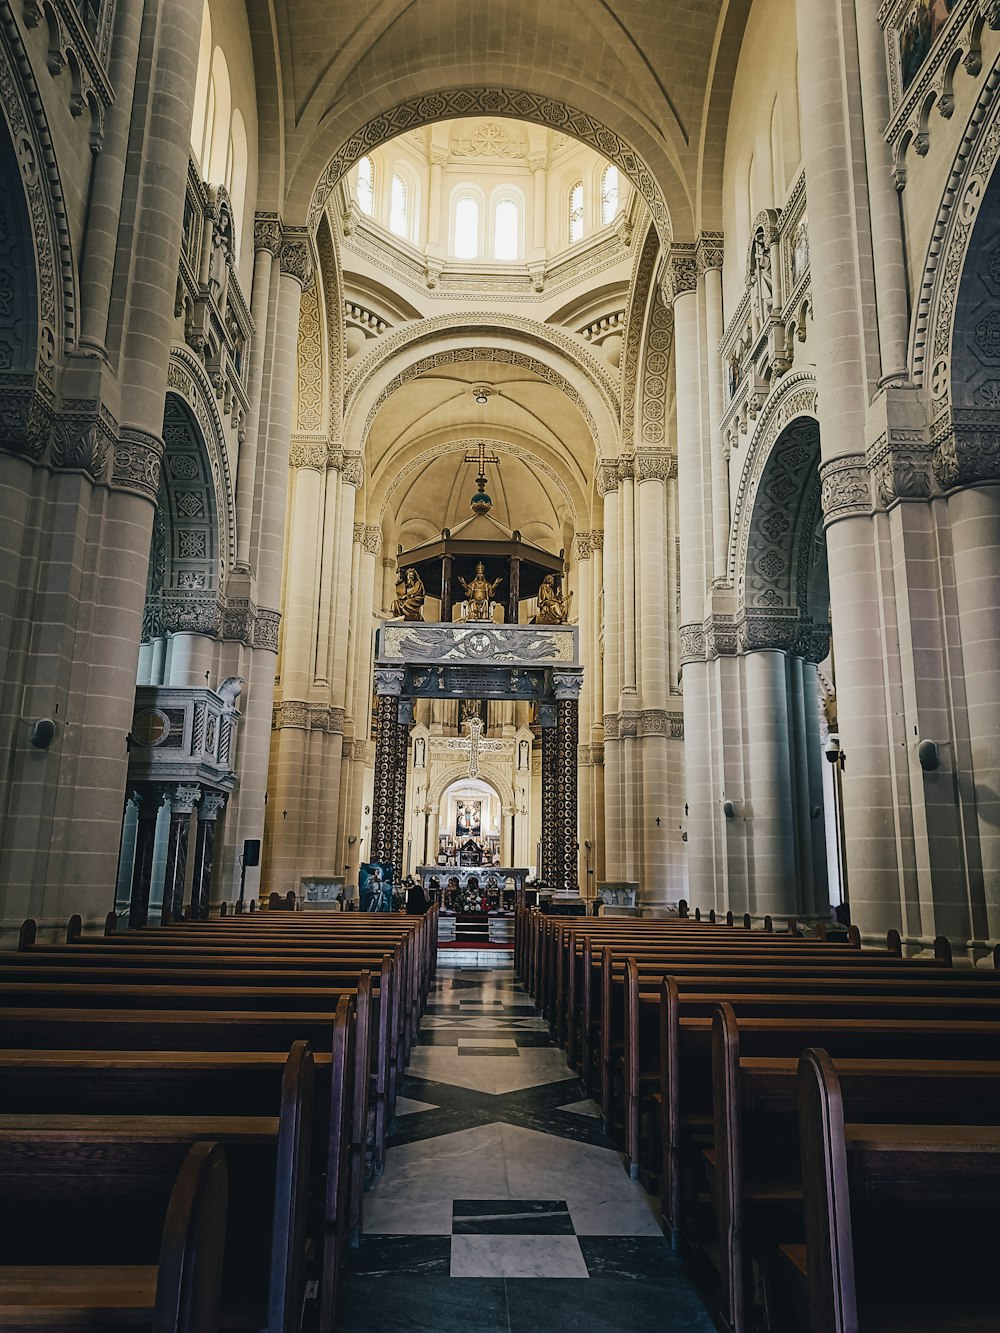 the inside of a large church with pews